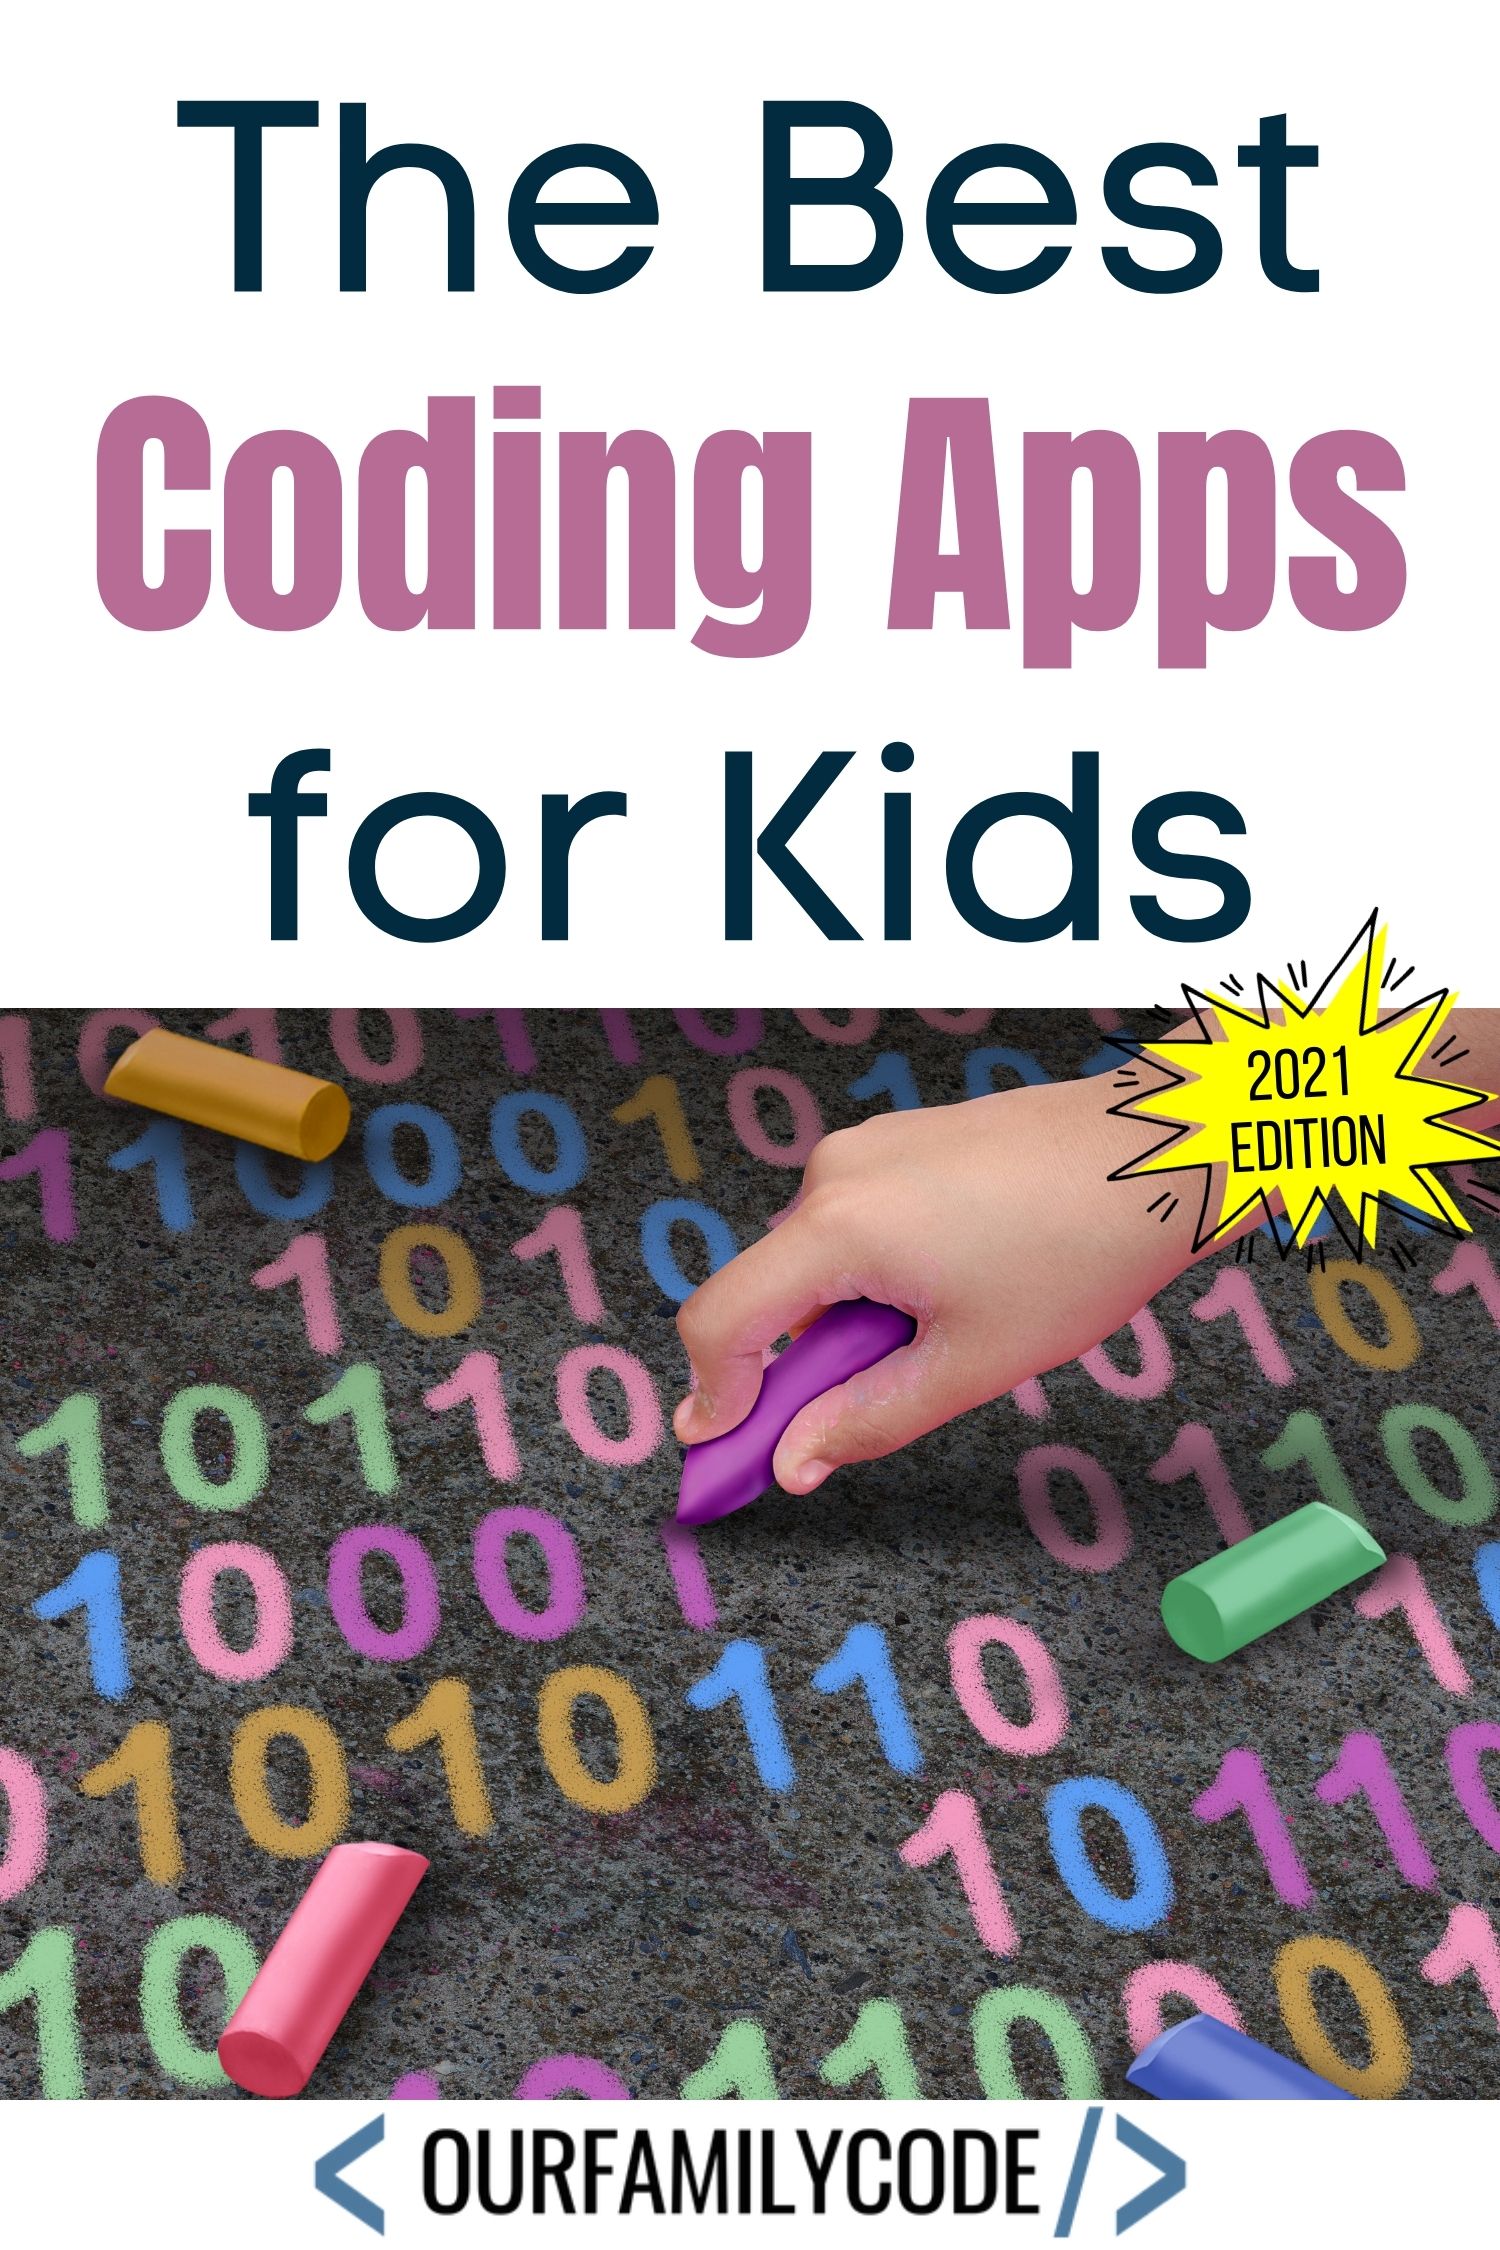 A picture of The Best Coding Apps for Kids written over a kids hand writing in binary code.